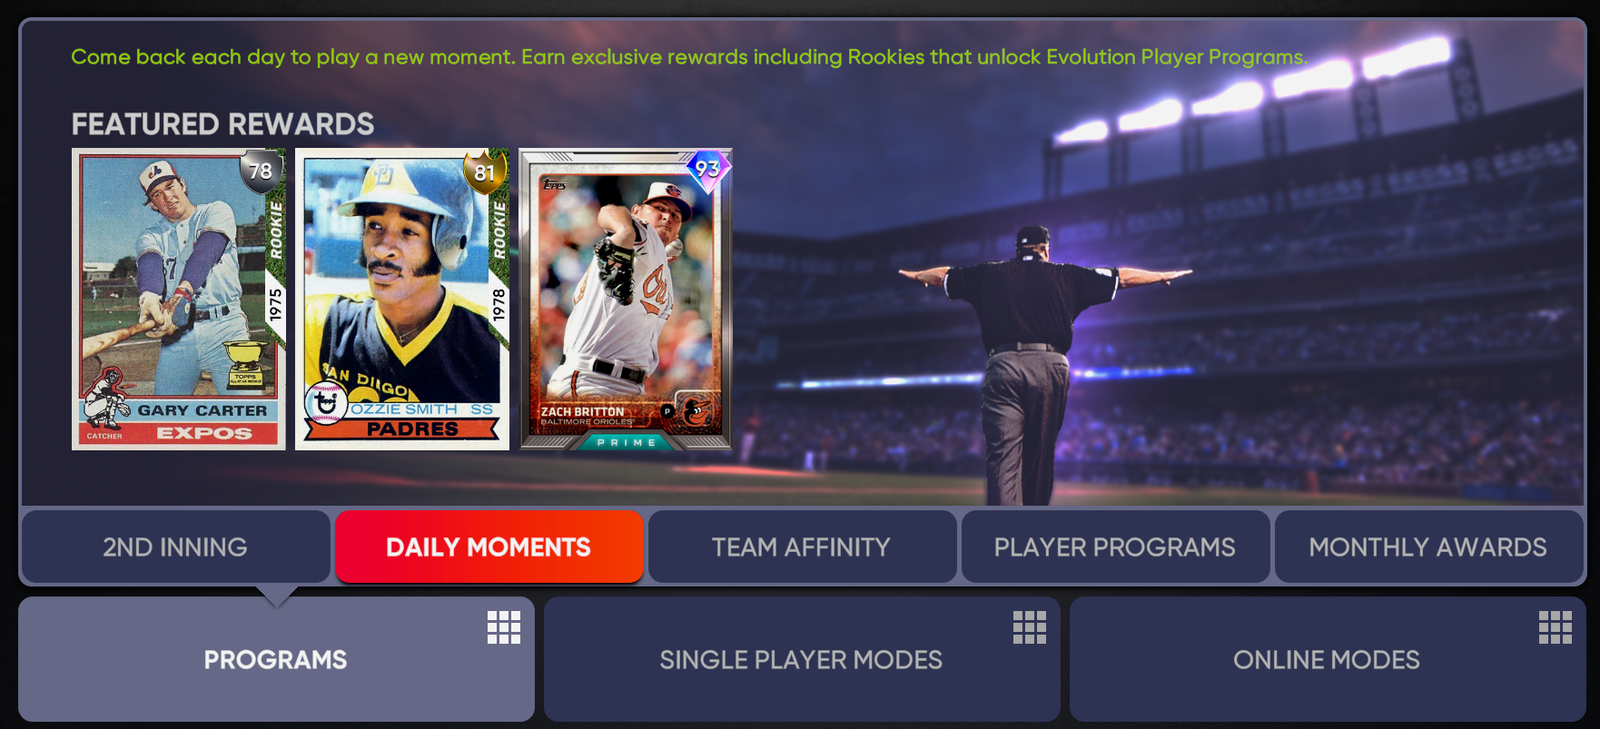 MLB The Show 21 June Daily Moments Program Rewards Choice Pack Evolution Rewind